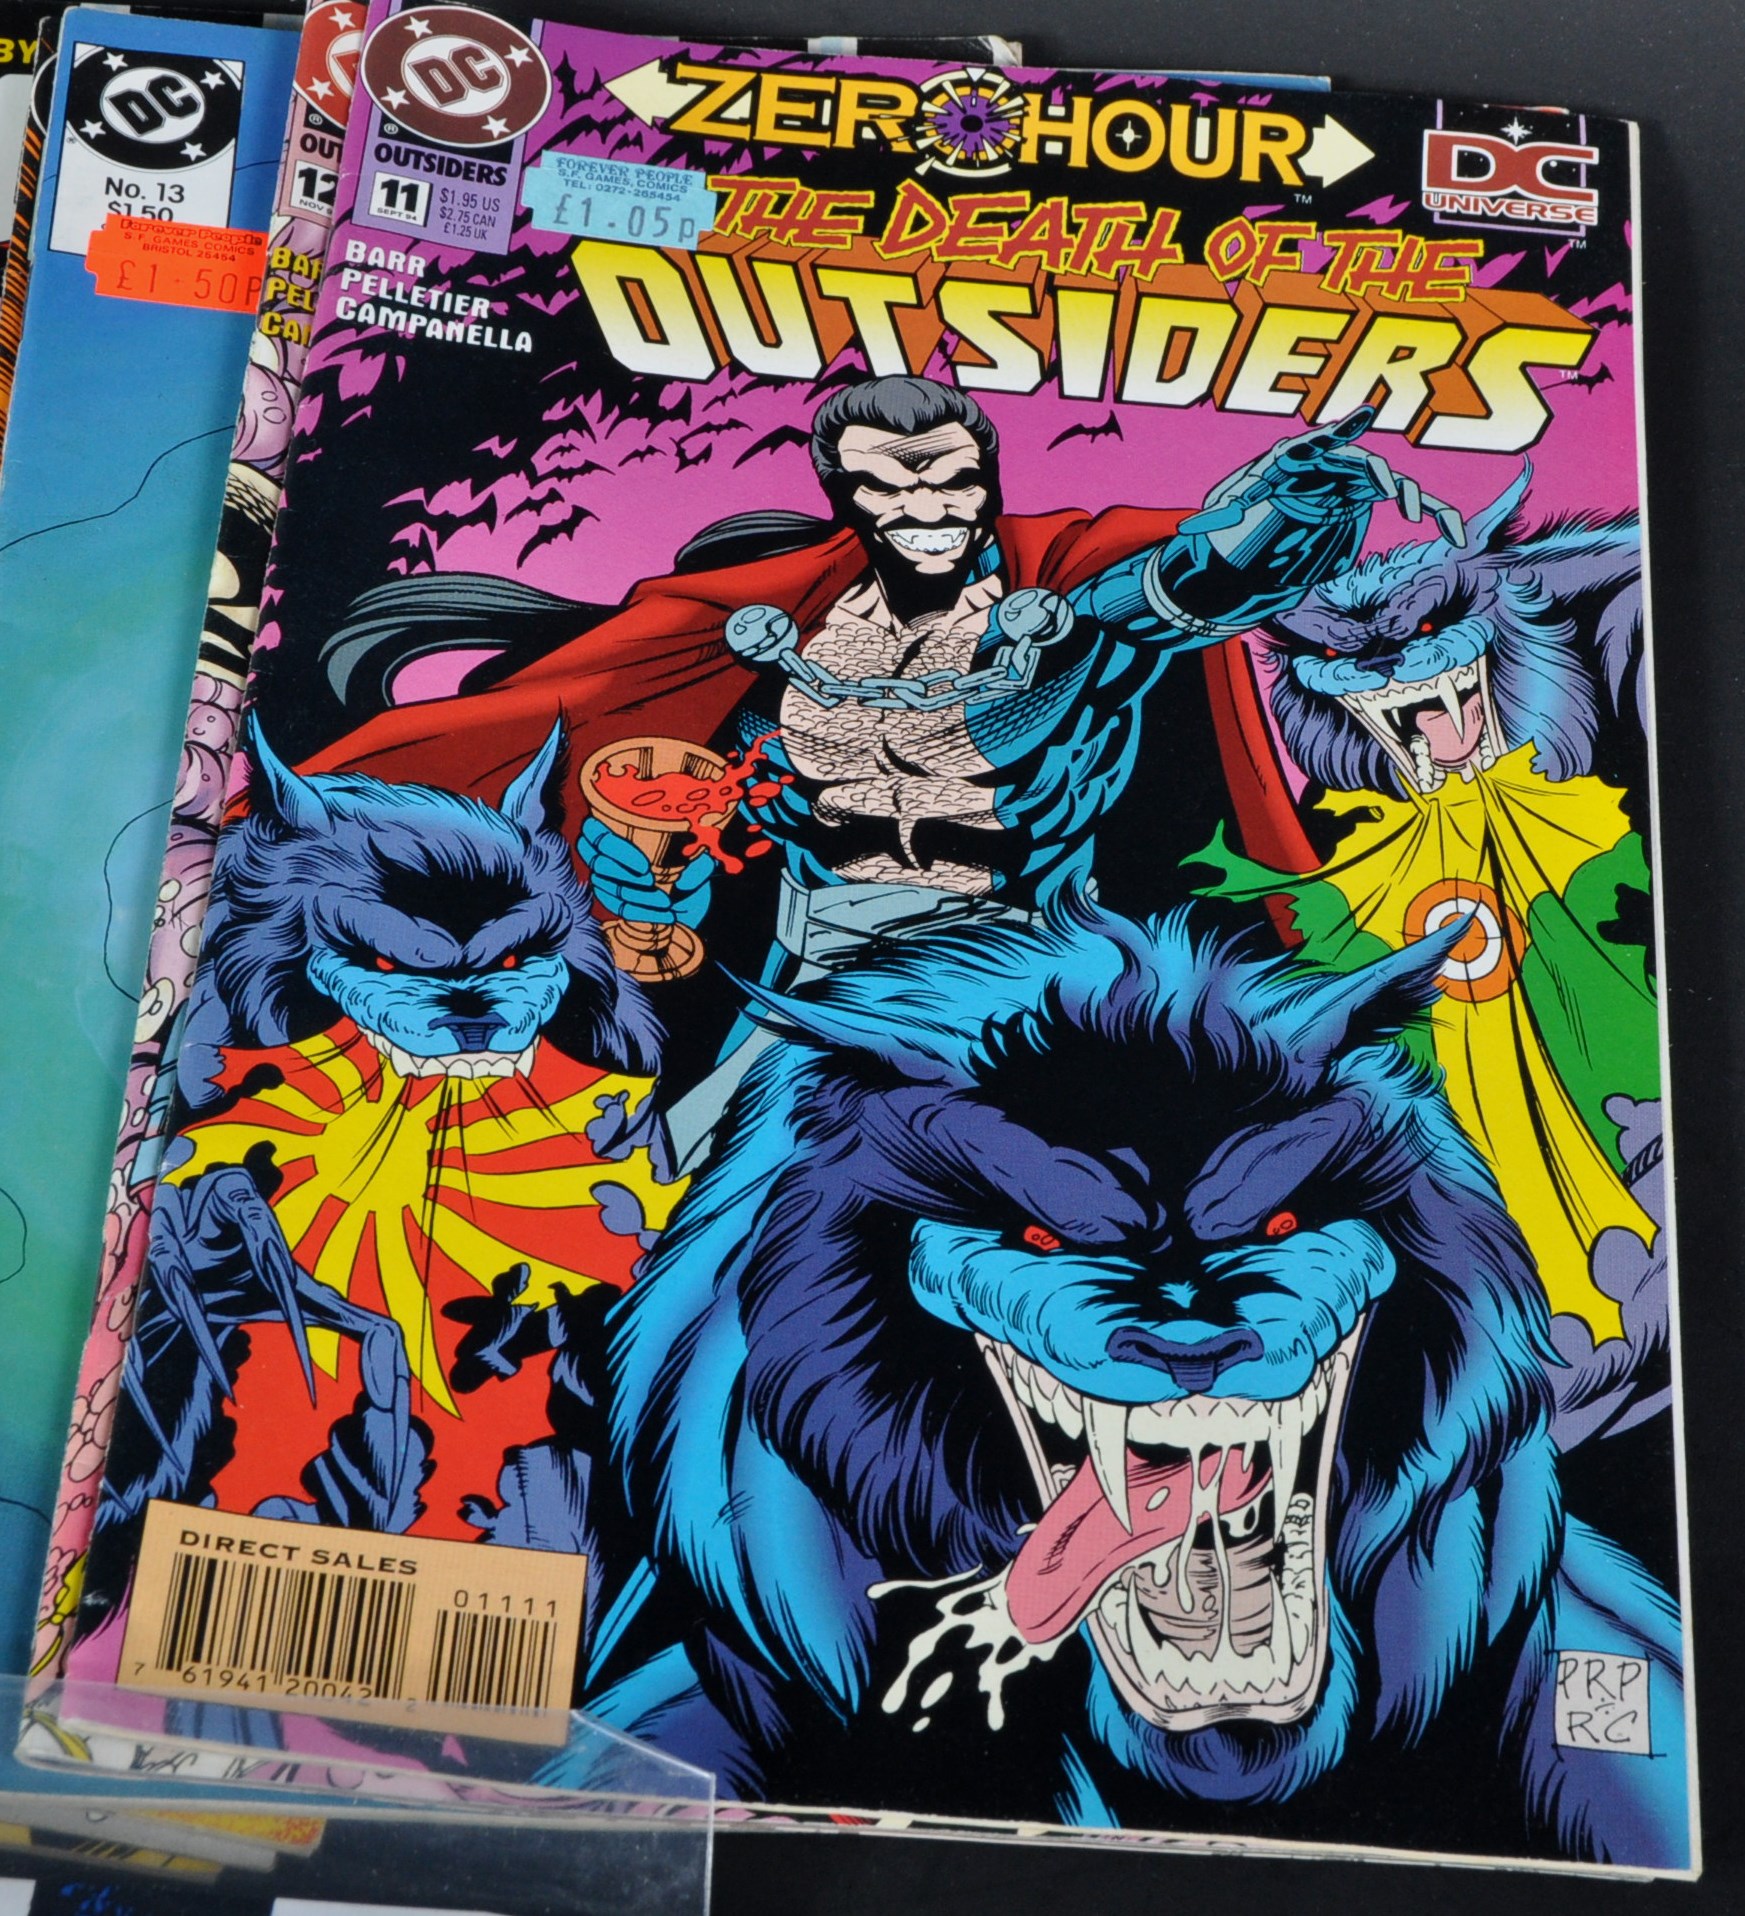 DC COMICS - THE OUTSIDERS - VINTAGE COMIC BOOKS - Image 5 of 6